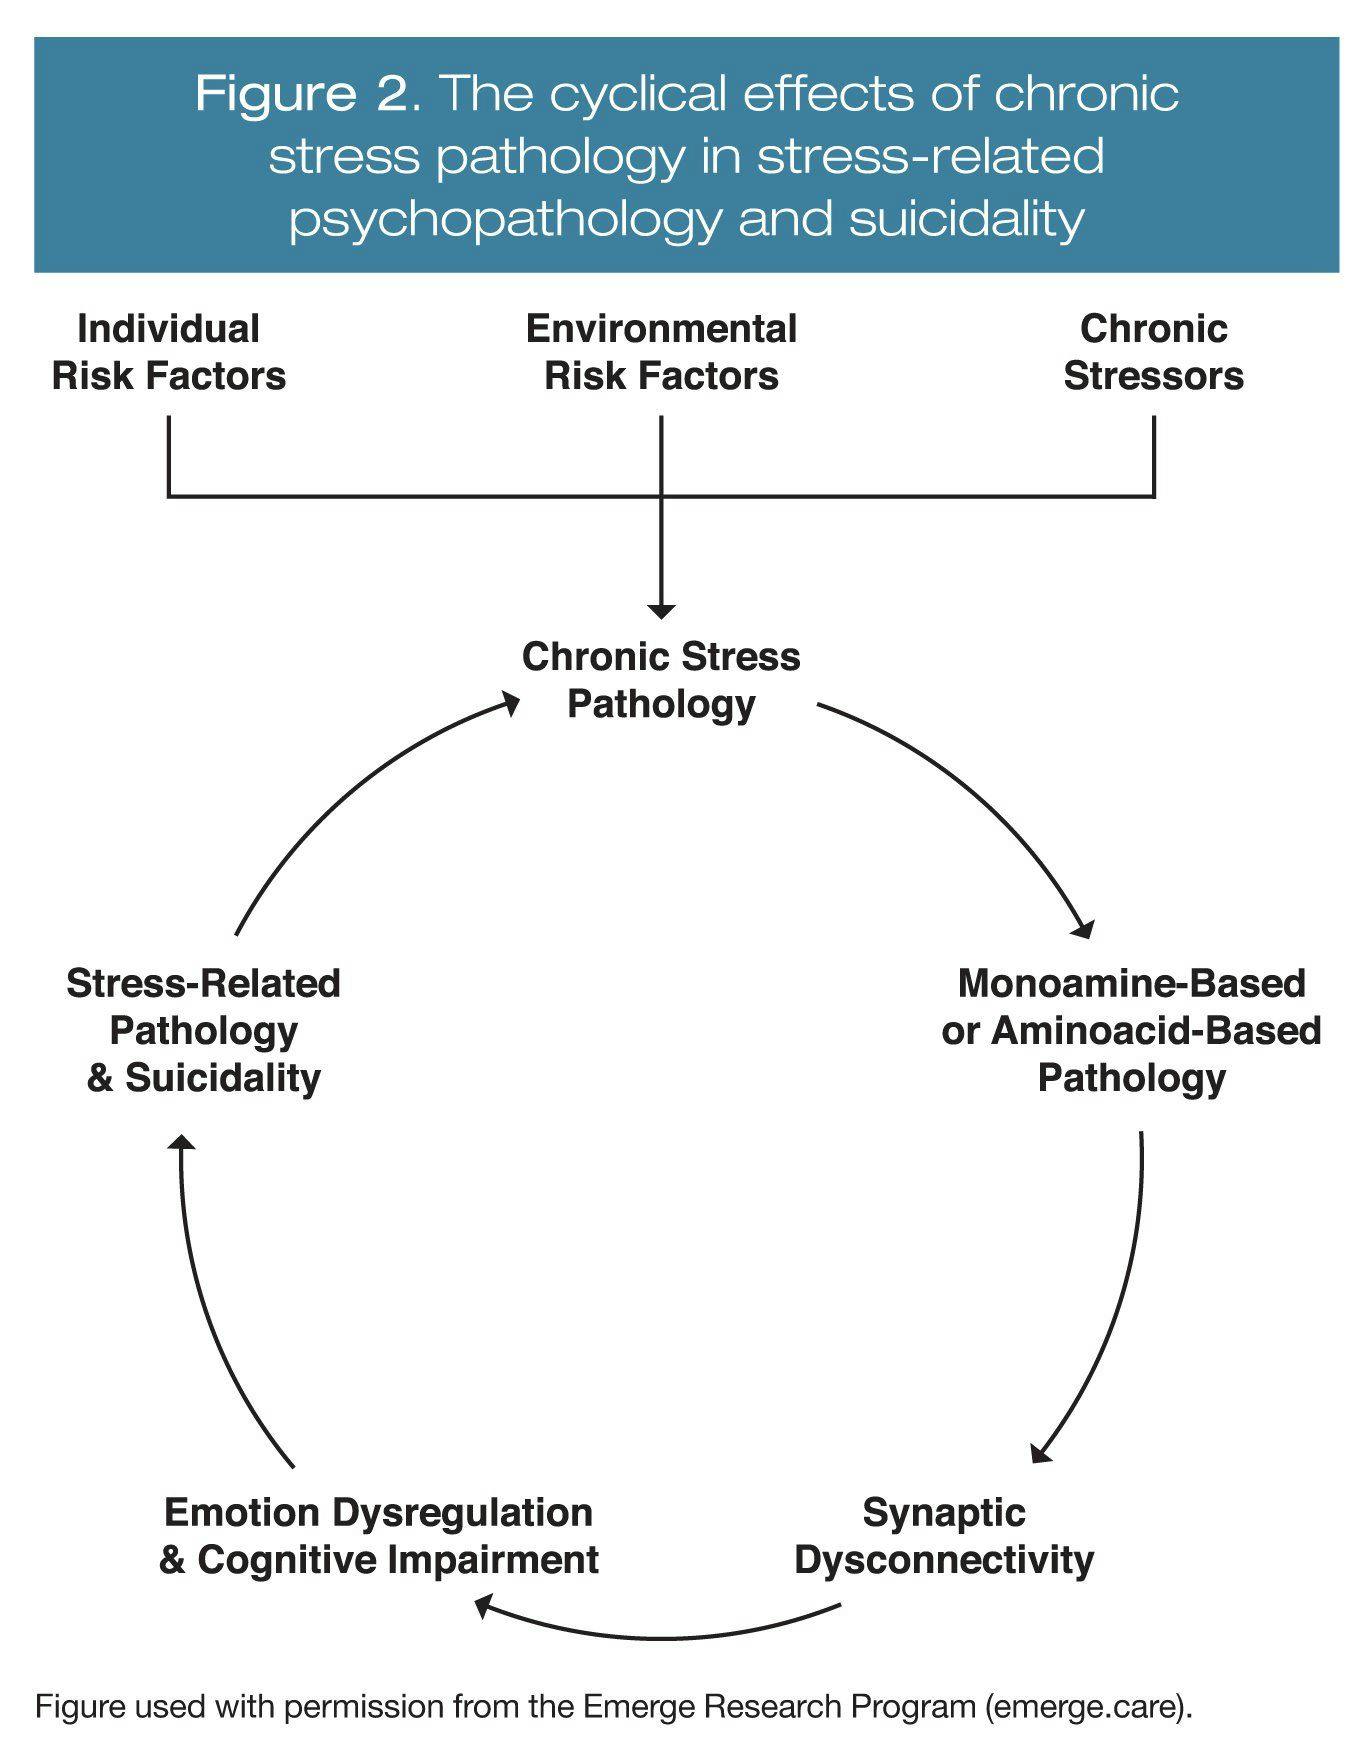 The cyclical effects of chronic stress pathology in stress-related psychopathology and suicidality